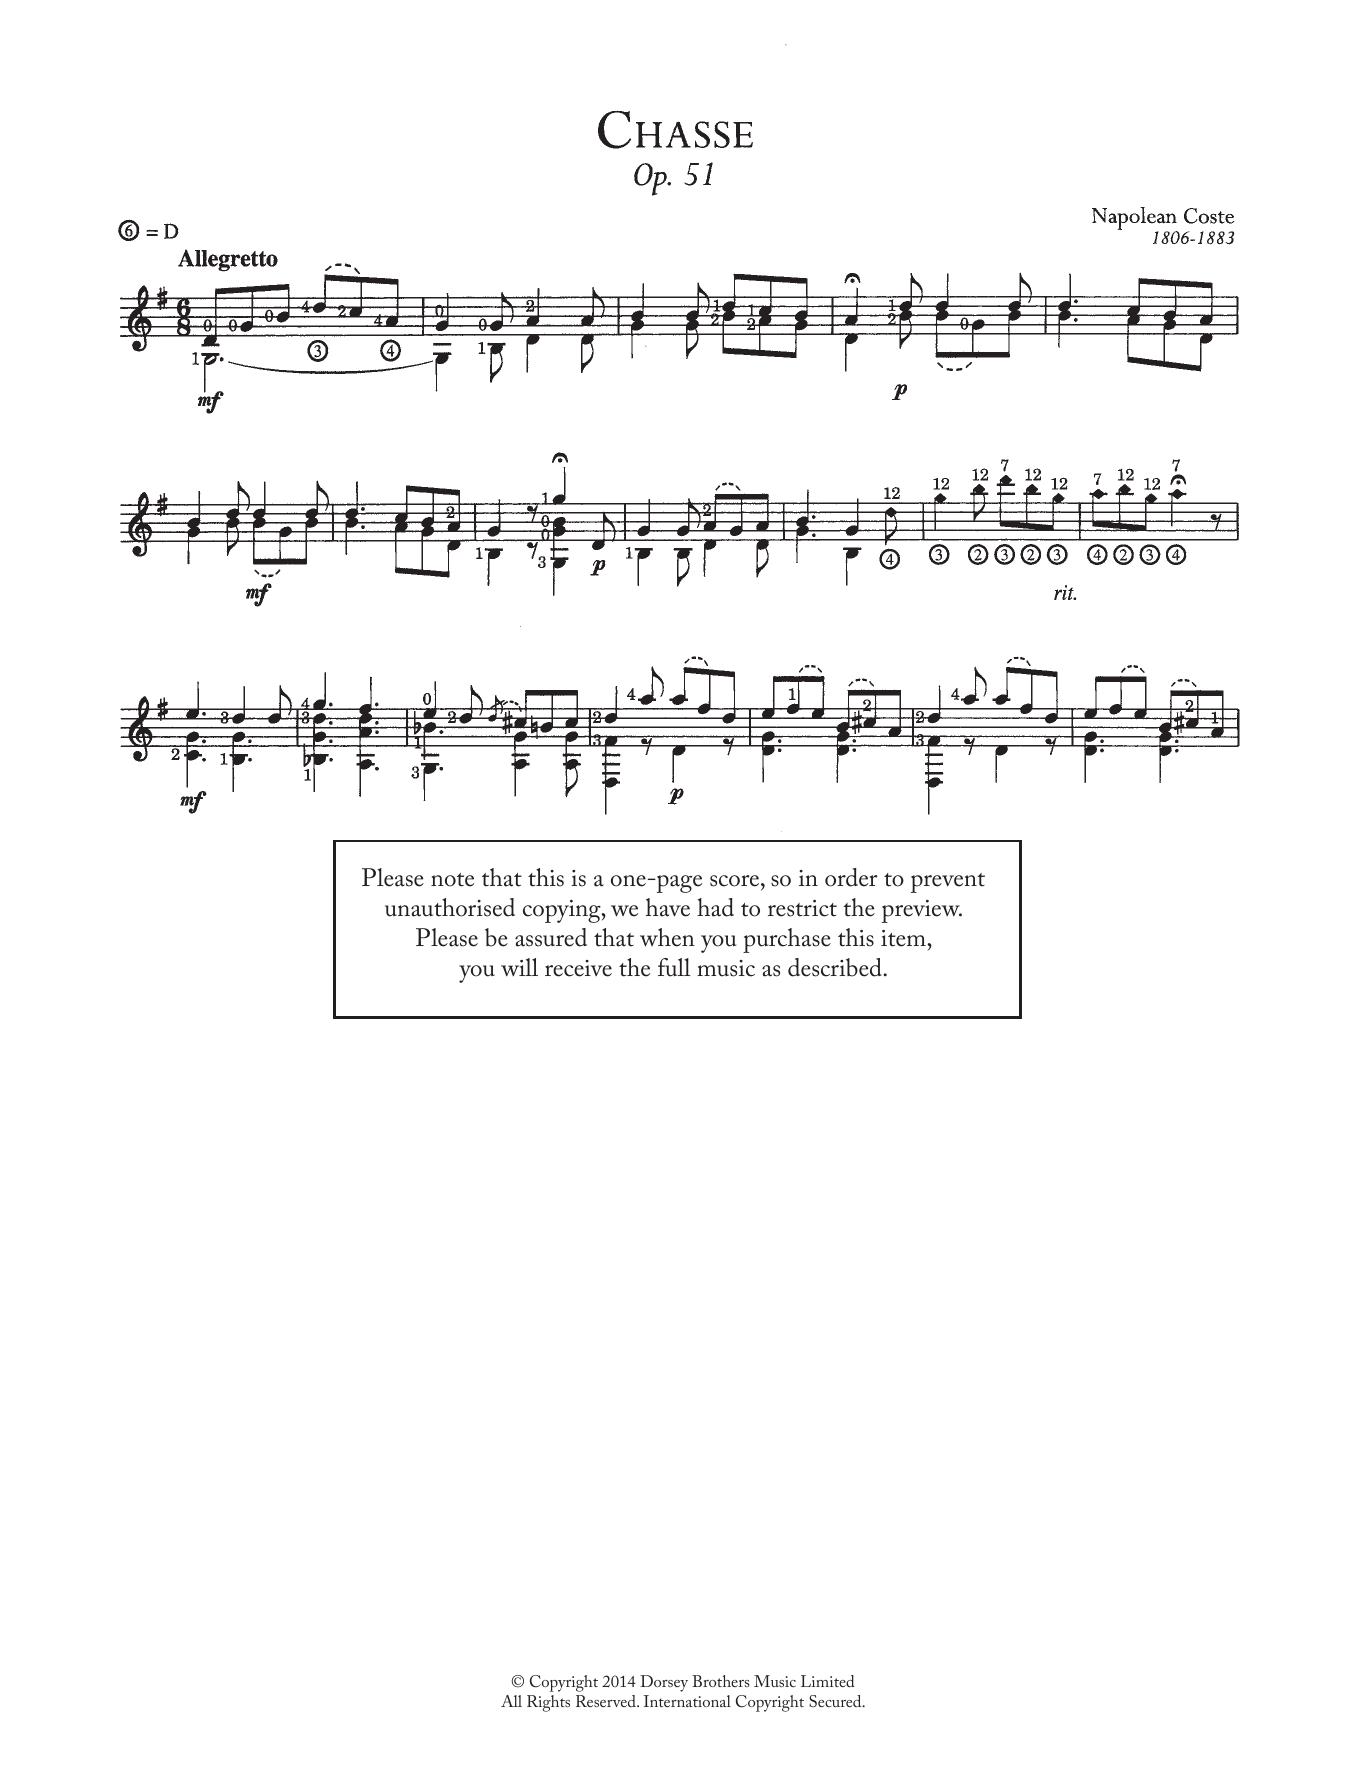 Download Napoleon Coste Chasse, Op.51 Sheet Music